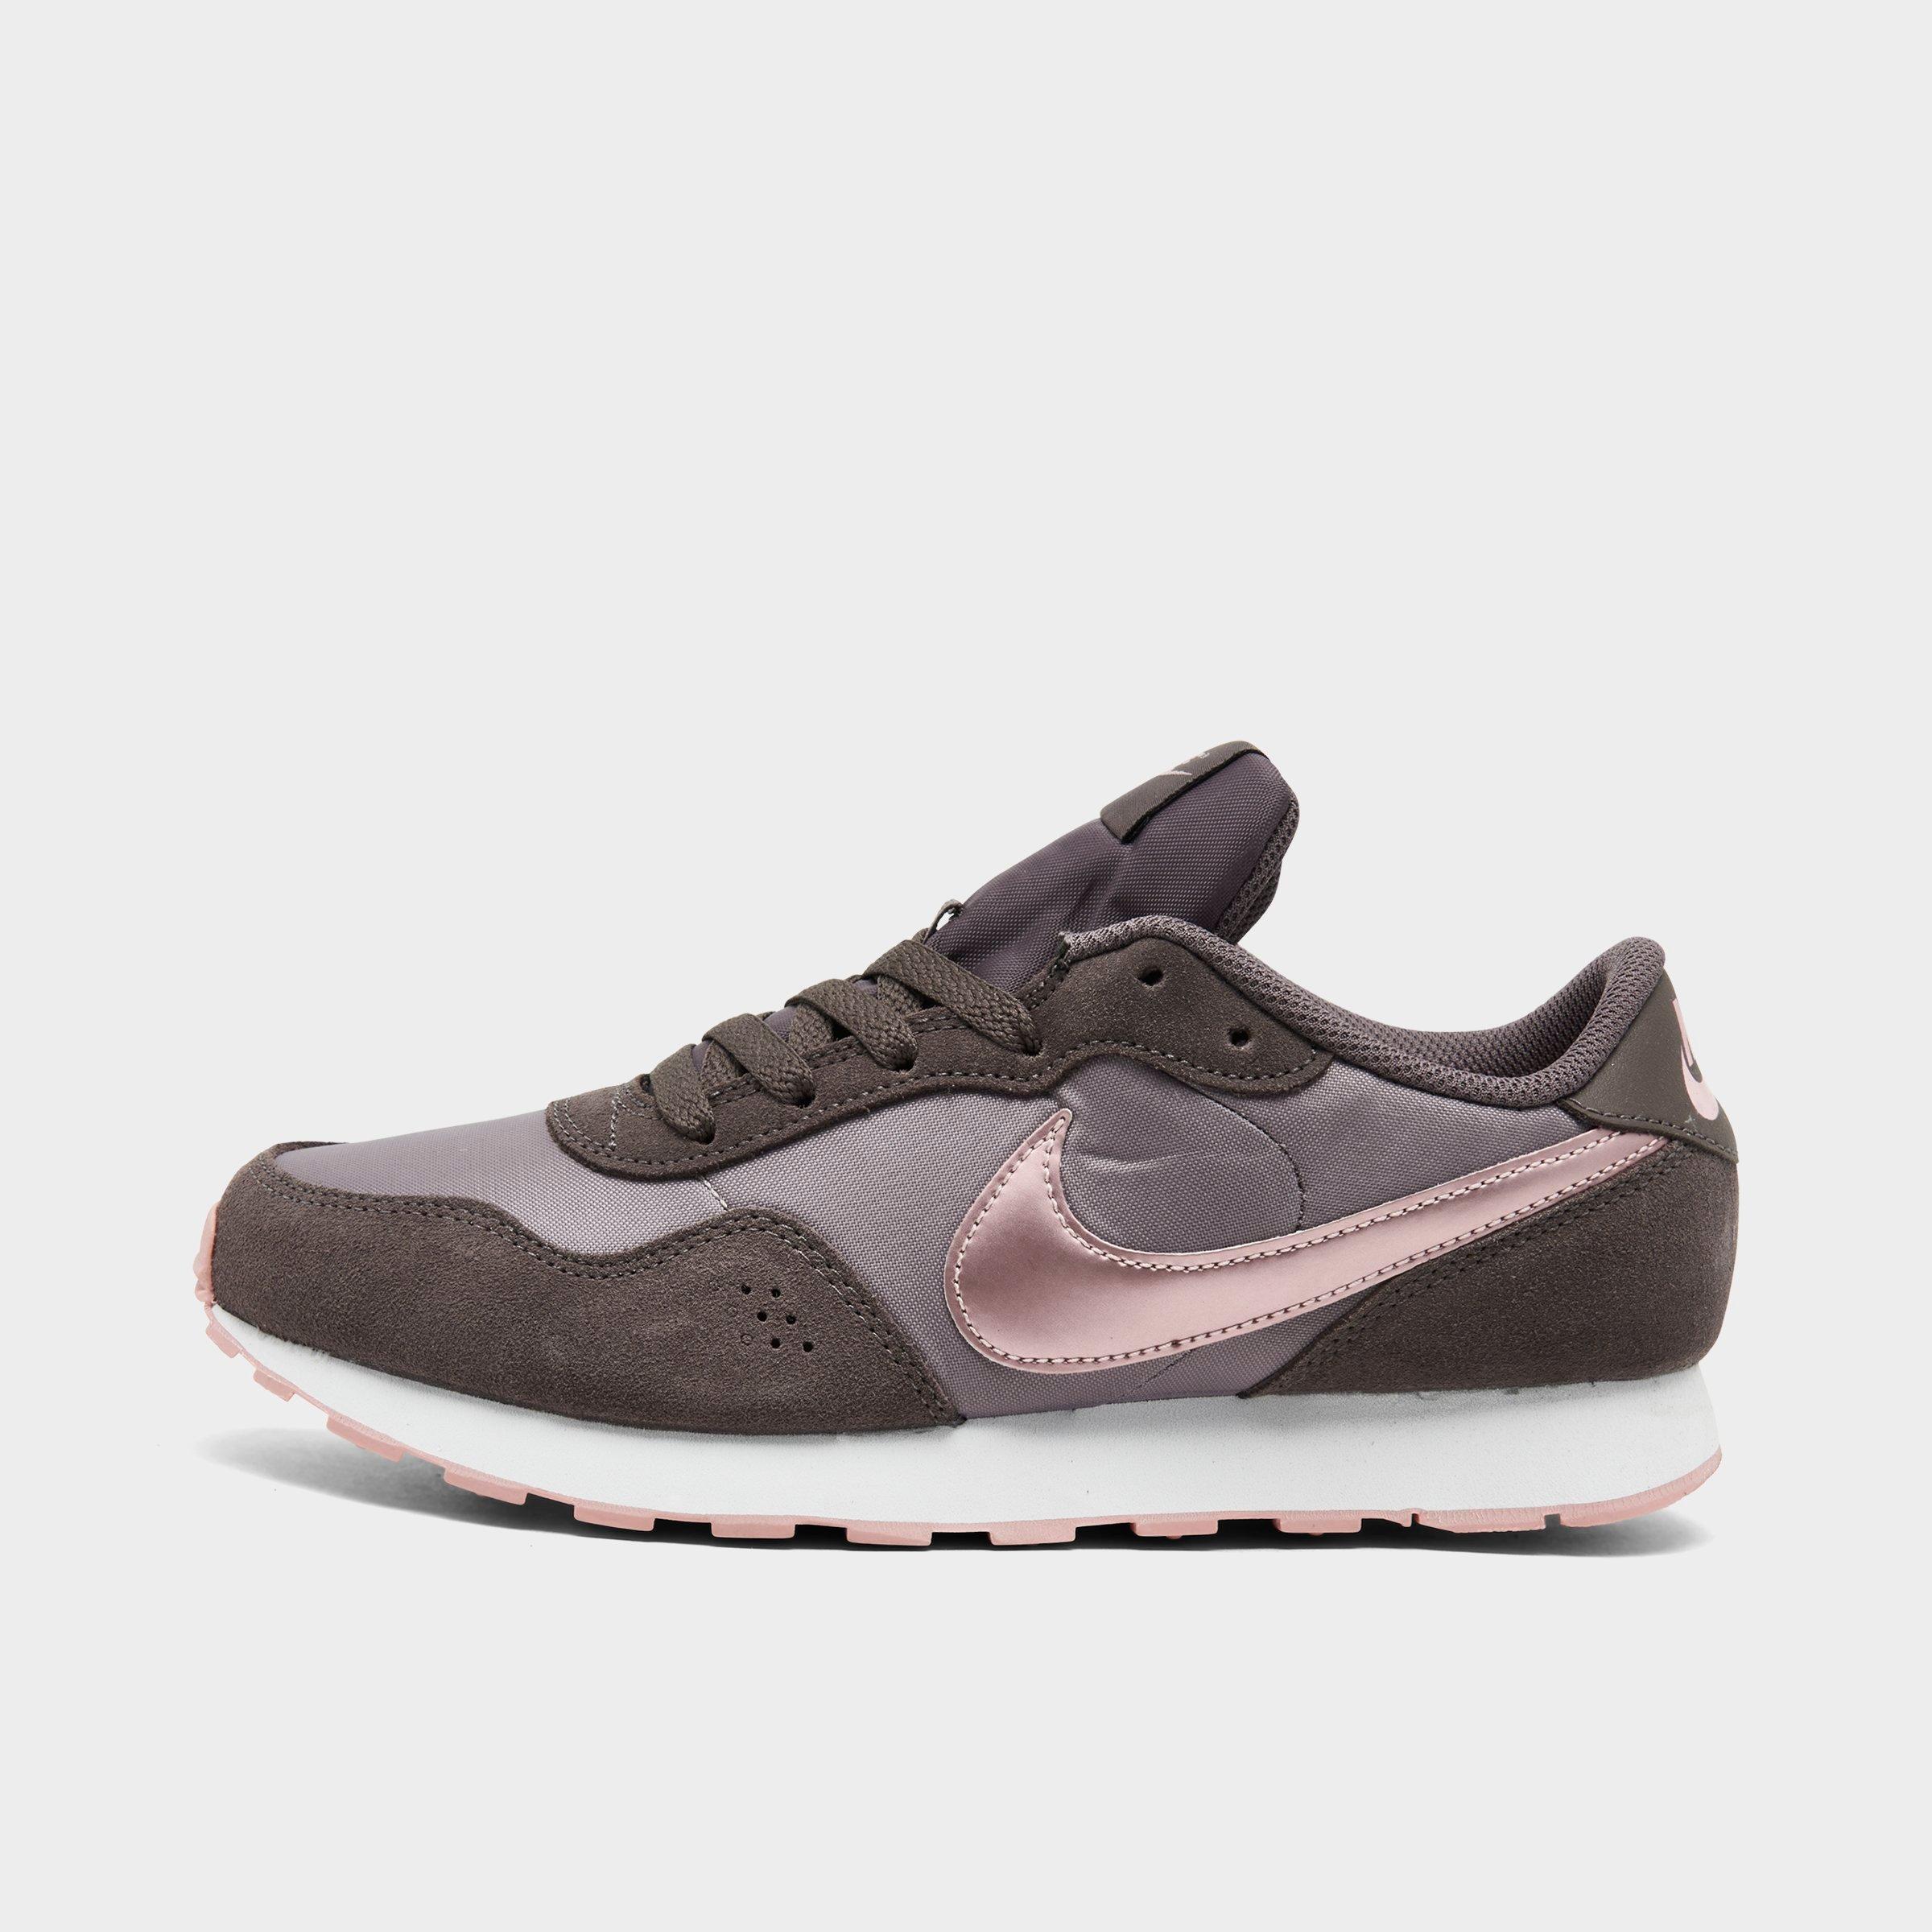 Nike Boys' Big Kids' Md Valiant Casual Shoes Size 6.0 Suede In Light Violet Ore/violet Ore/pink Glaze